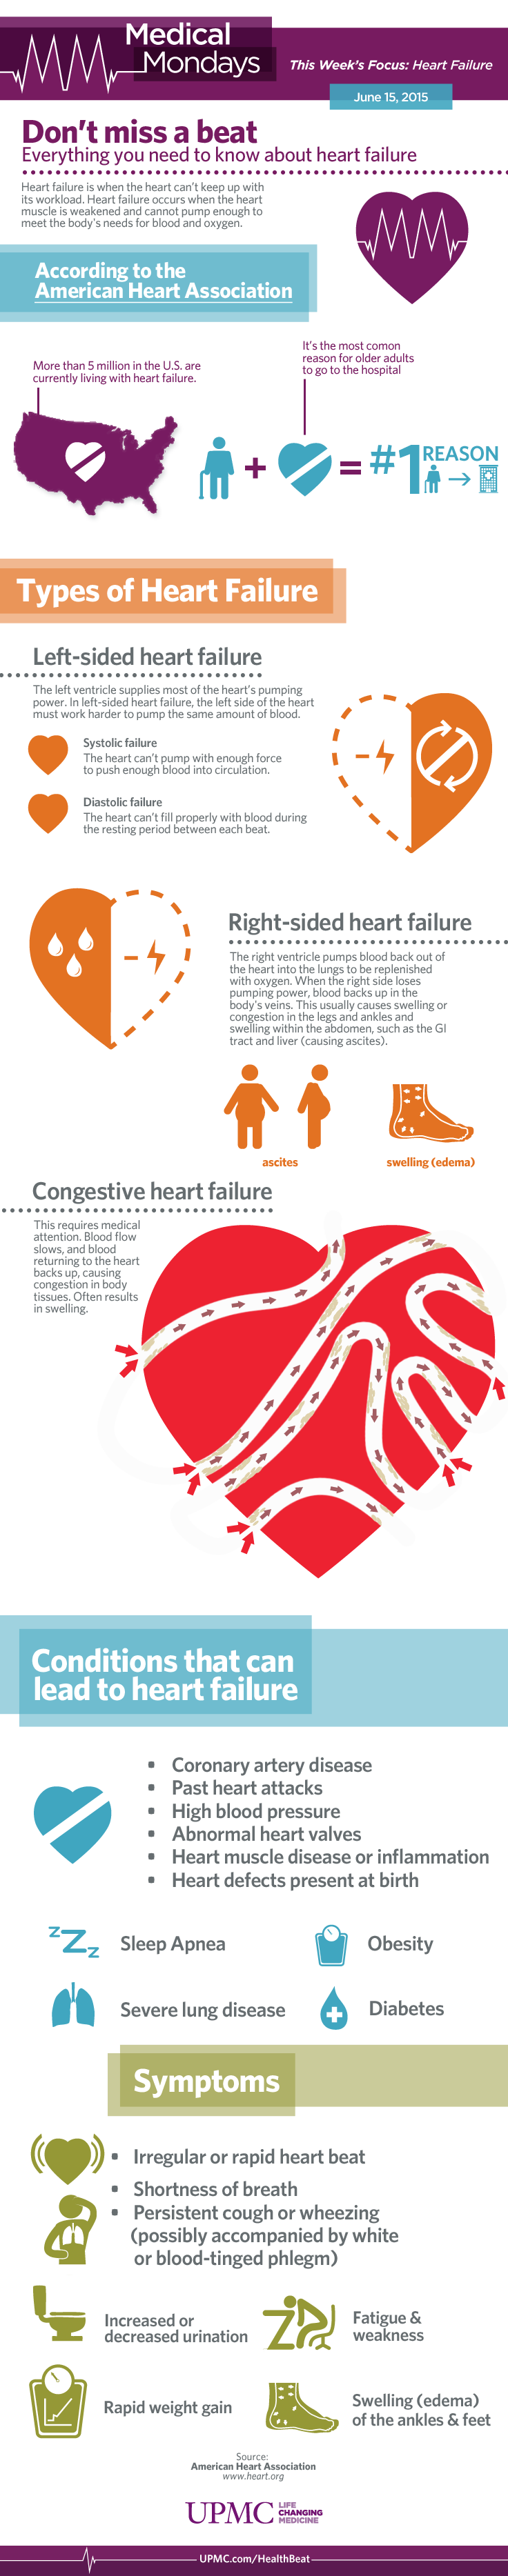 Infographic: What You Need to Know About Heart Failure | UPMC